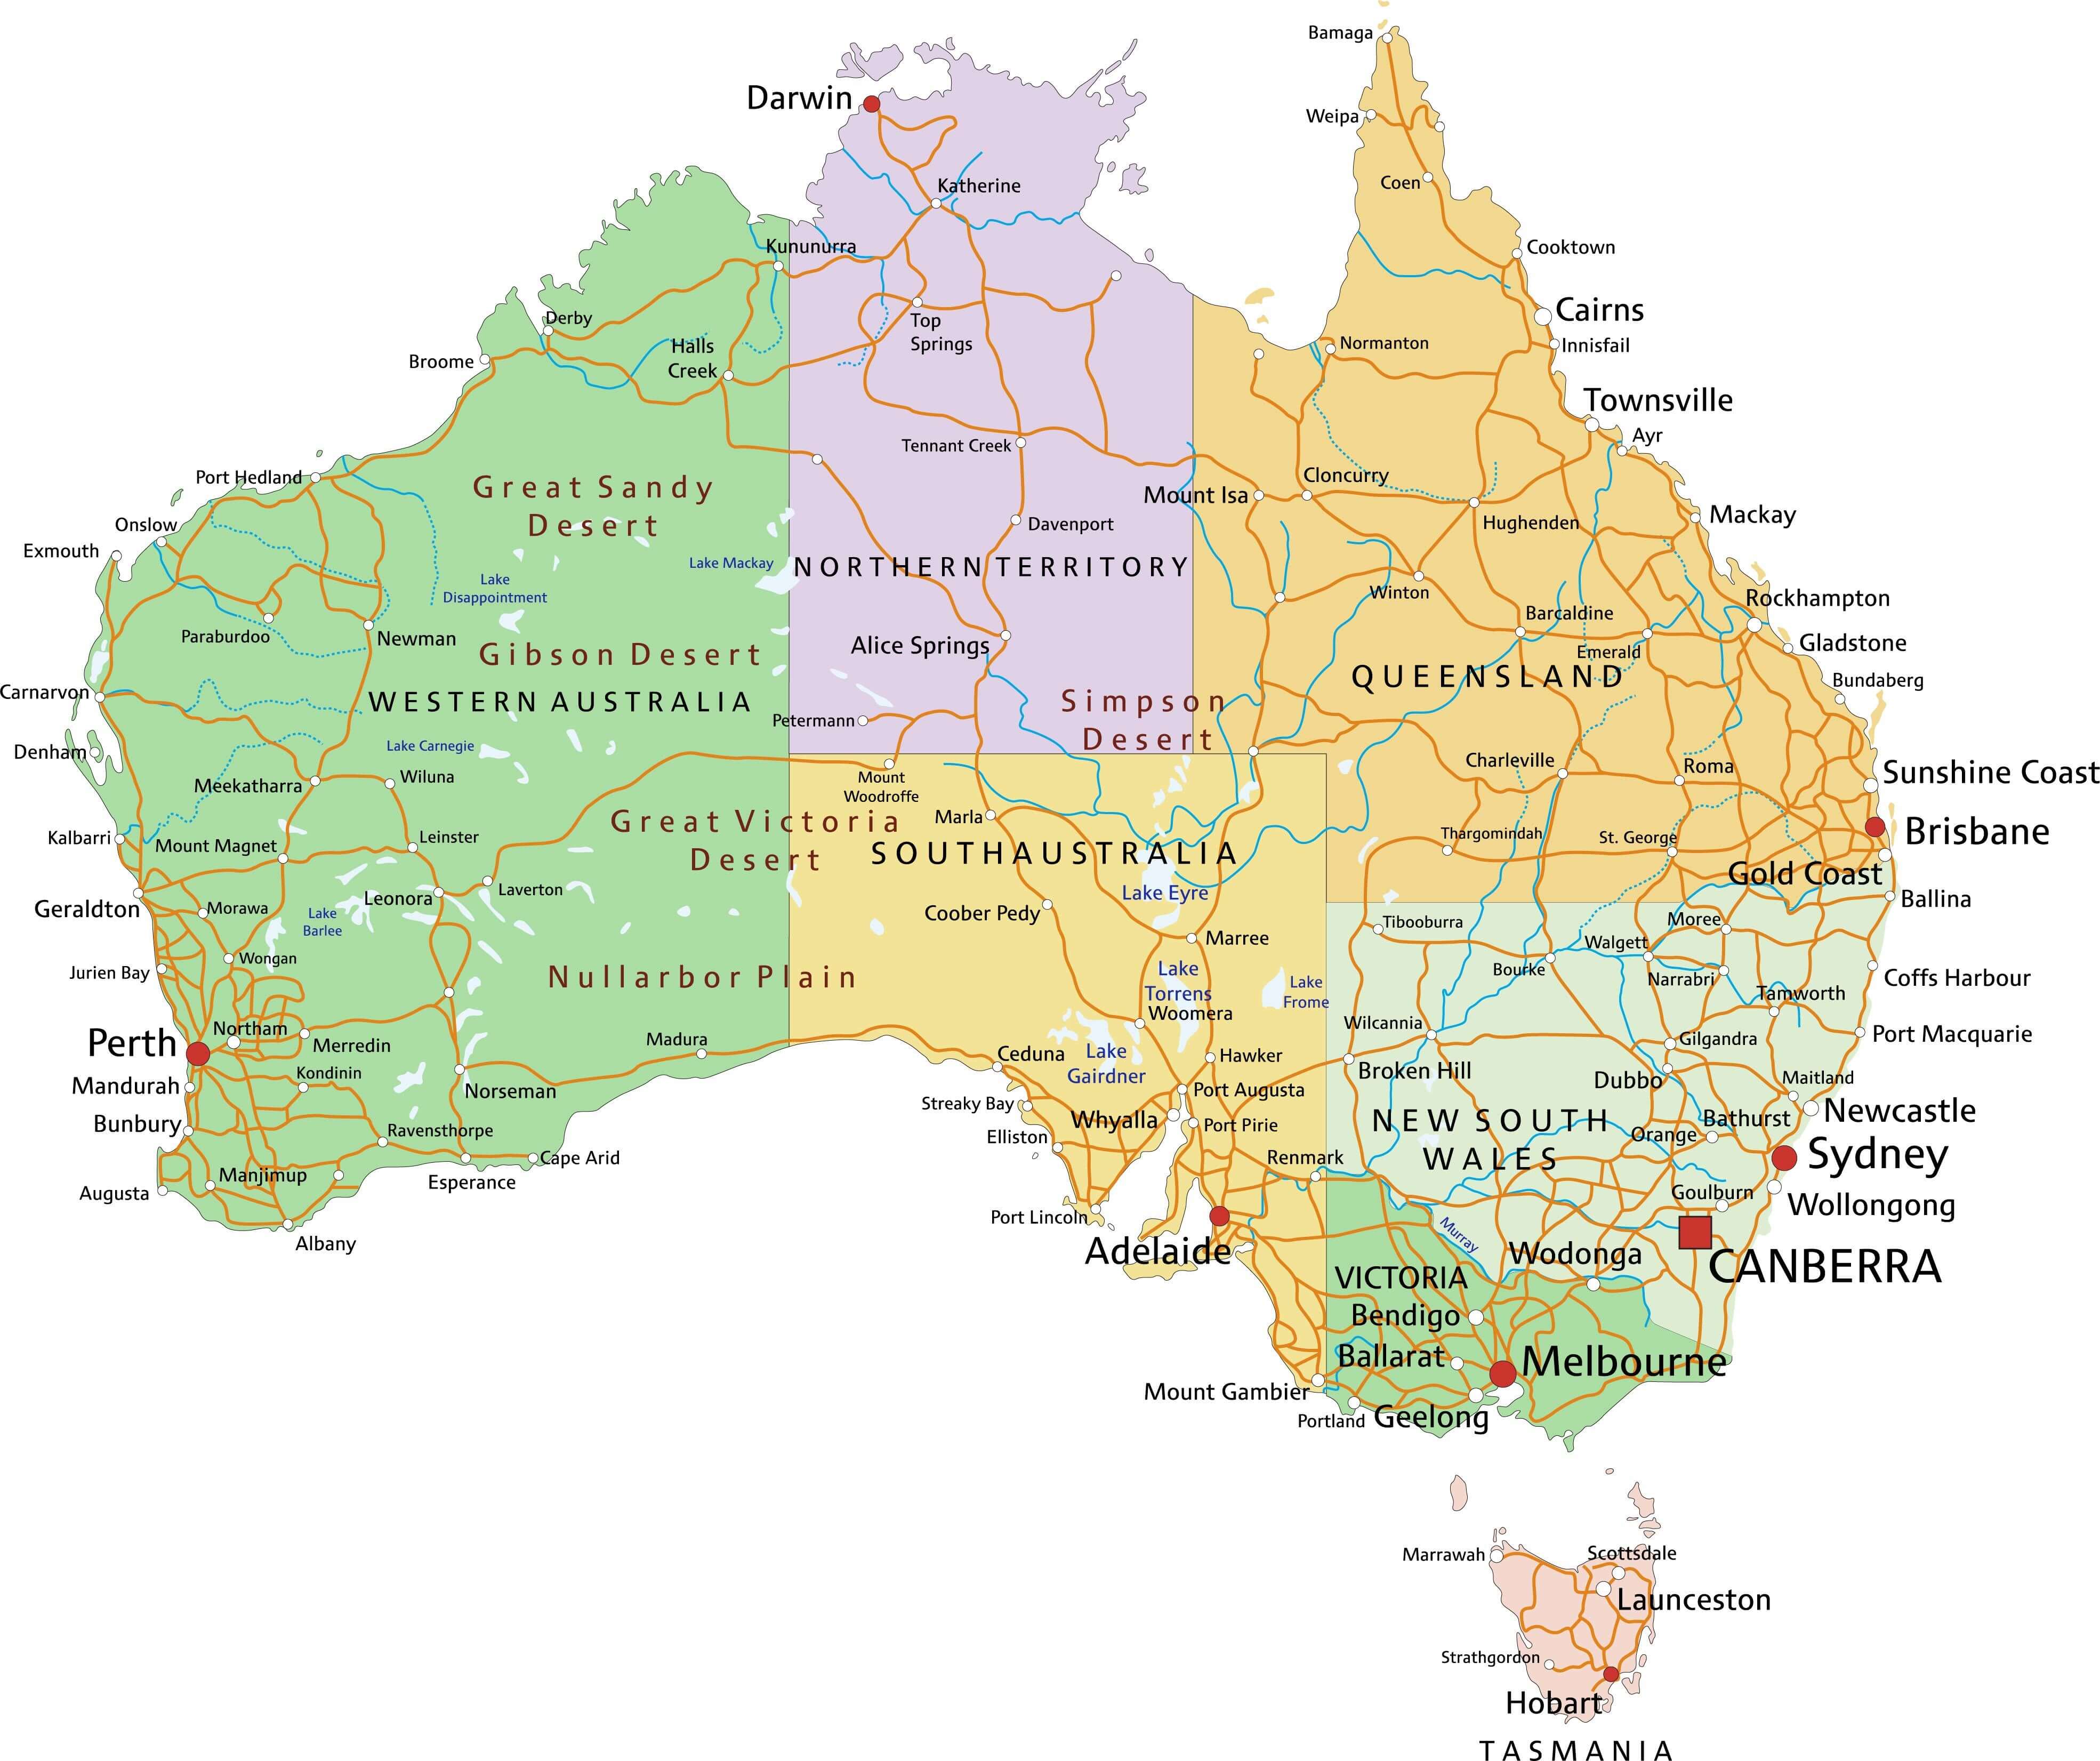 Australia detailed political map with cities, regions and states